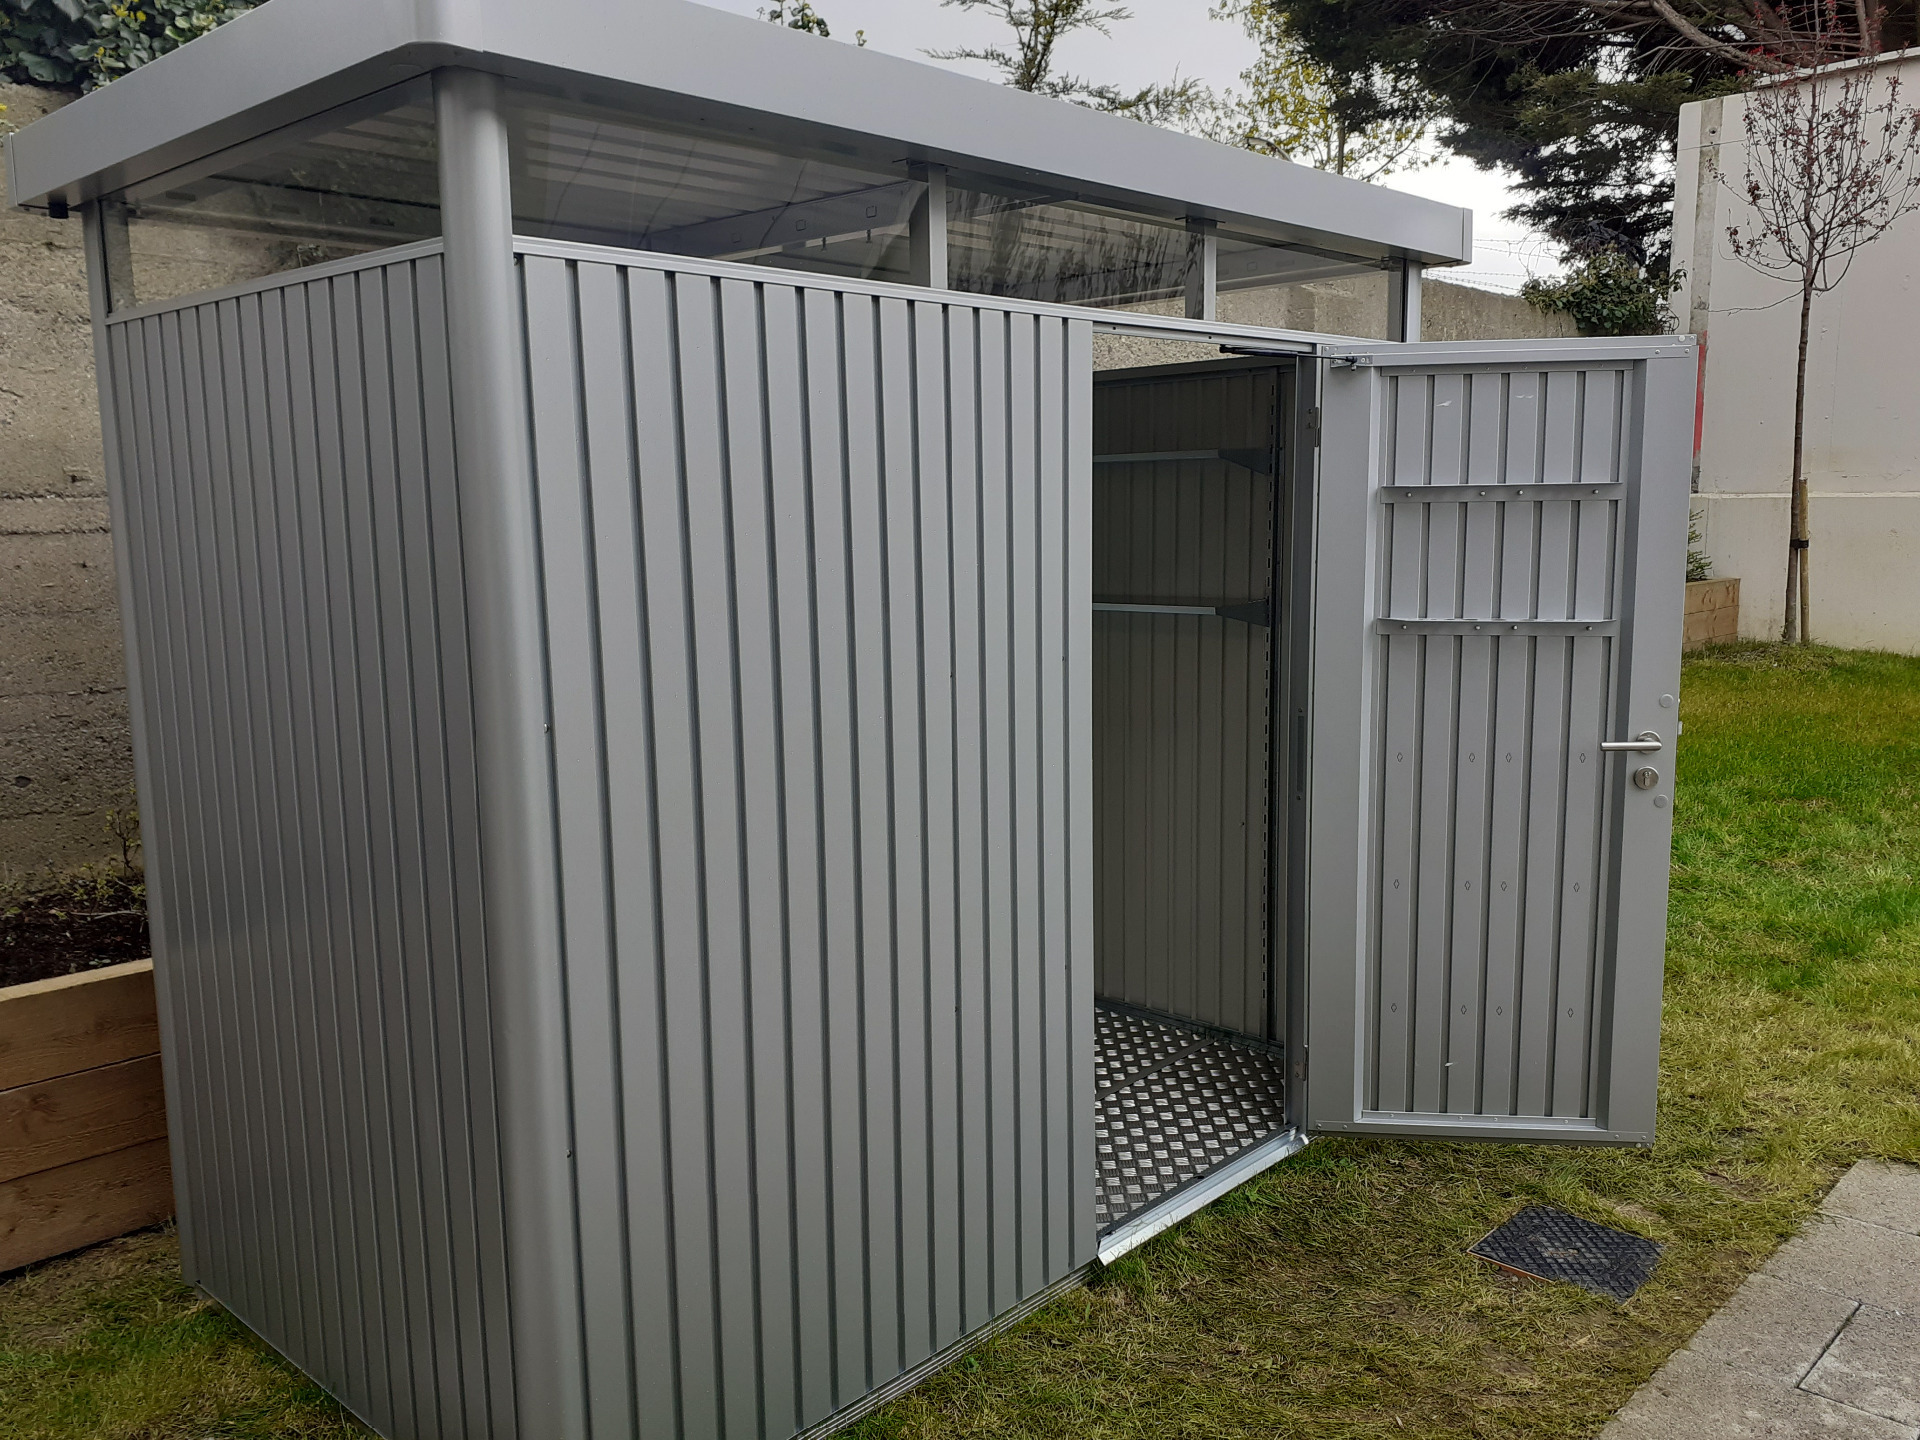 Biohort HighLine Steel Garden Sheds | The stylish & secure way to store your garden items